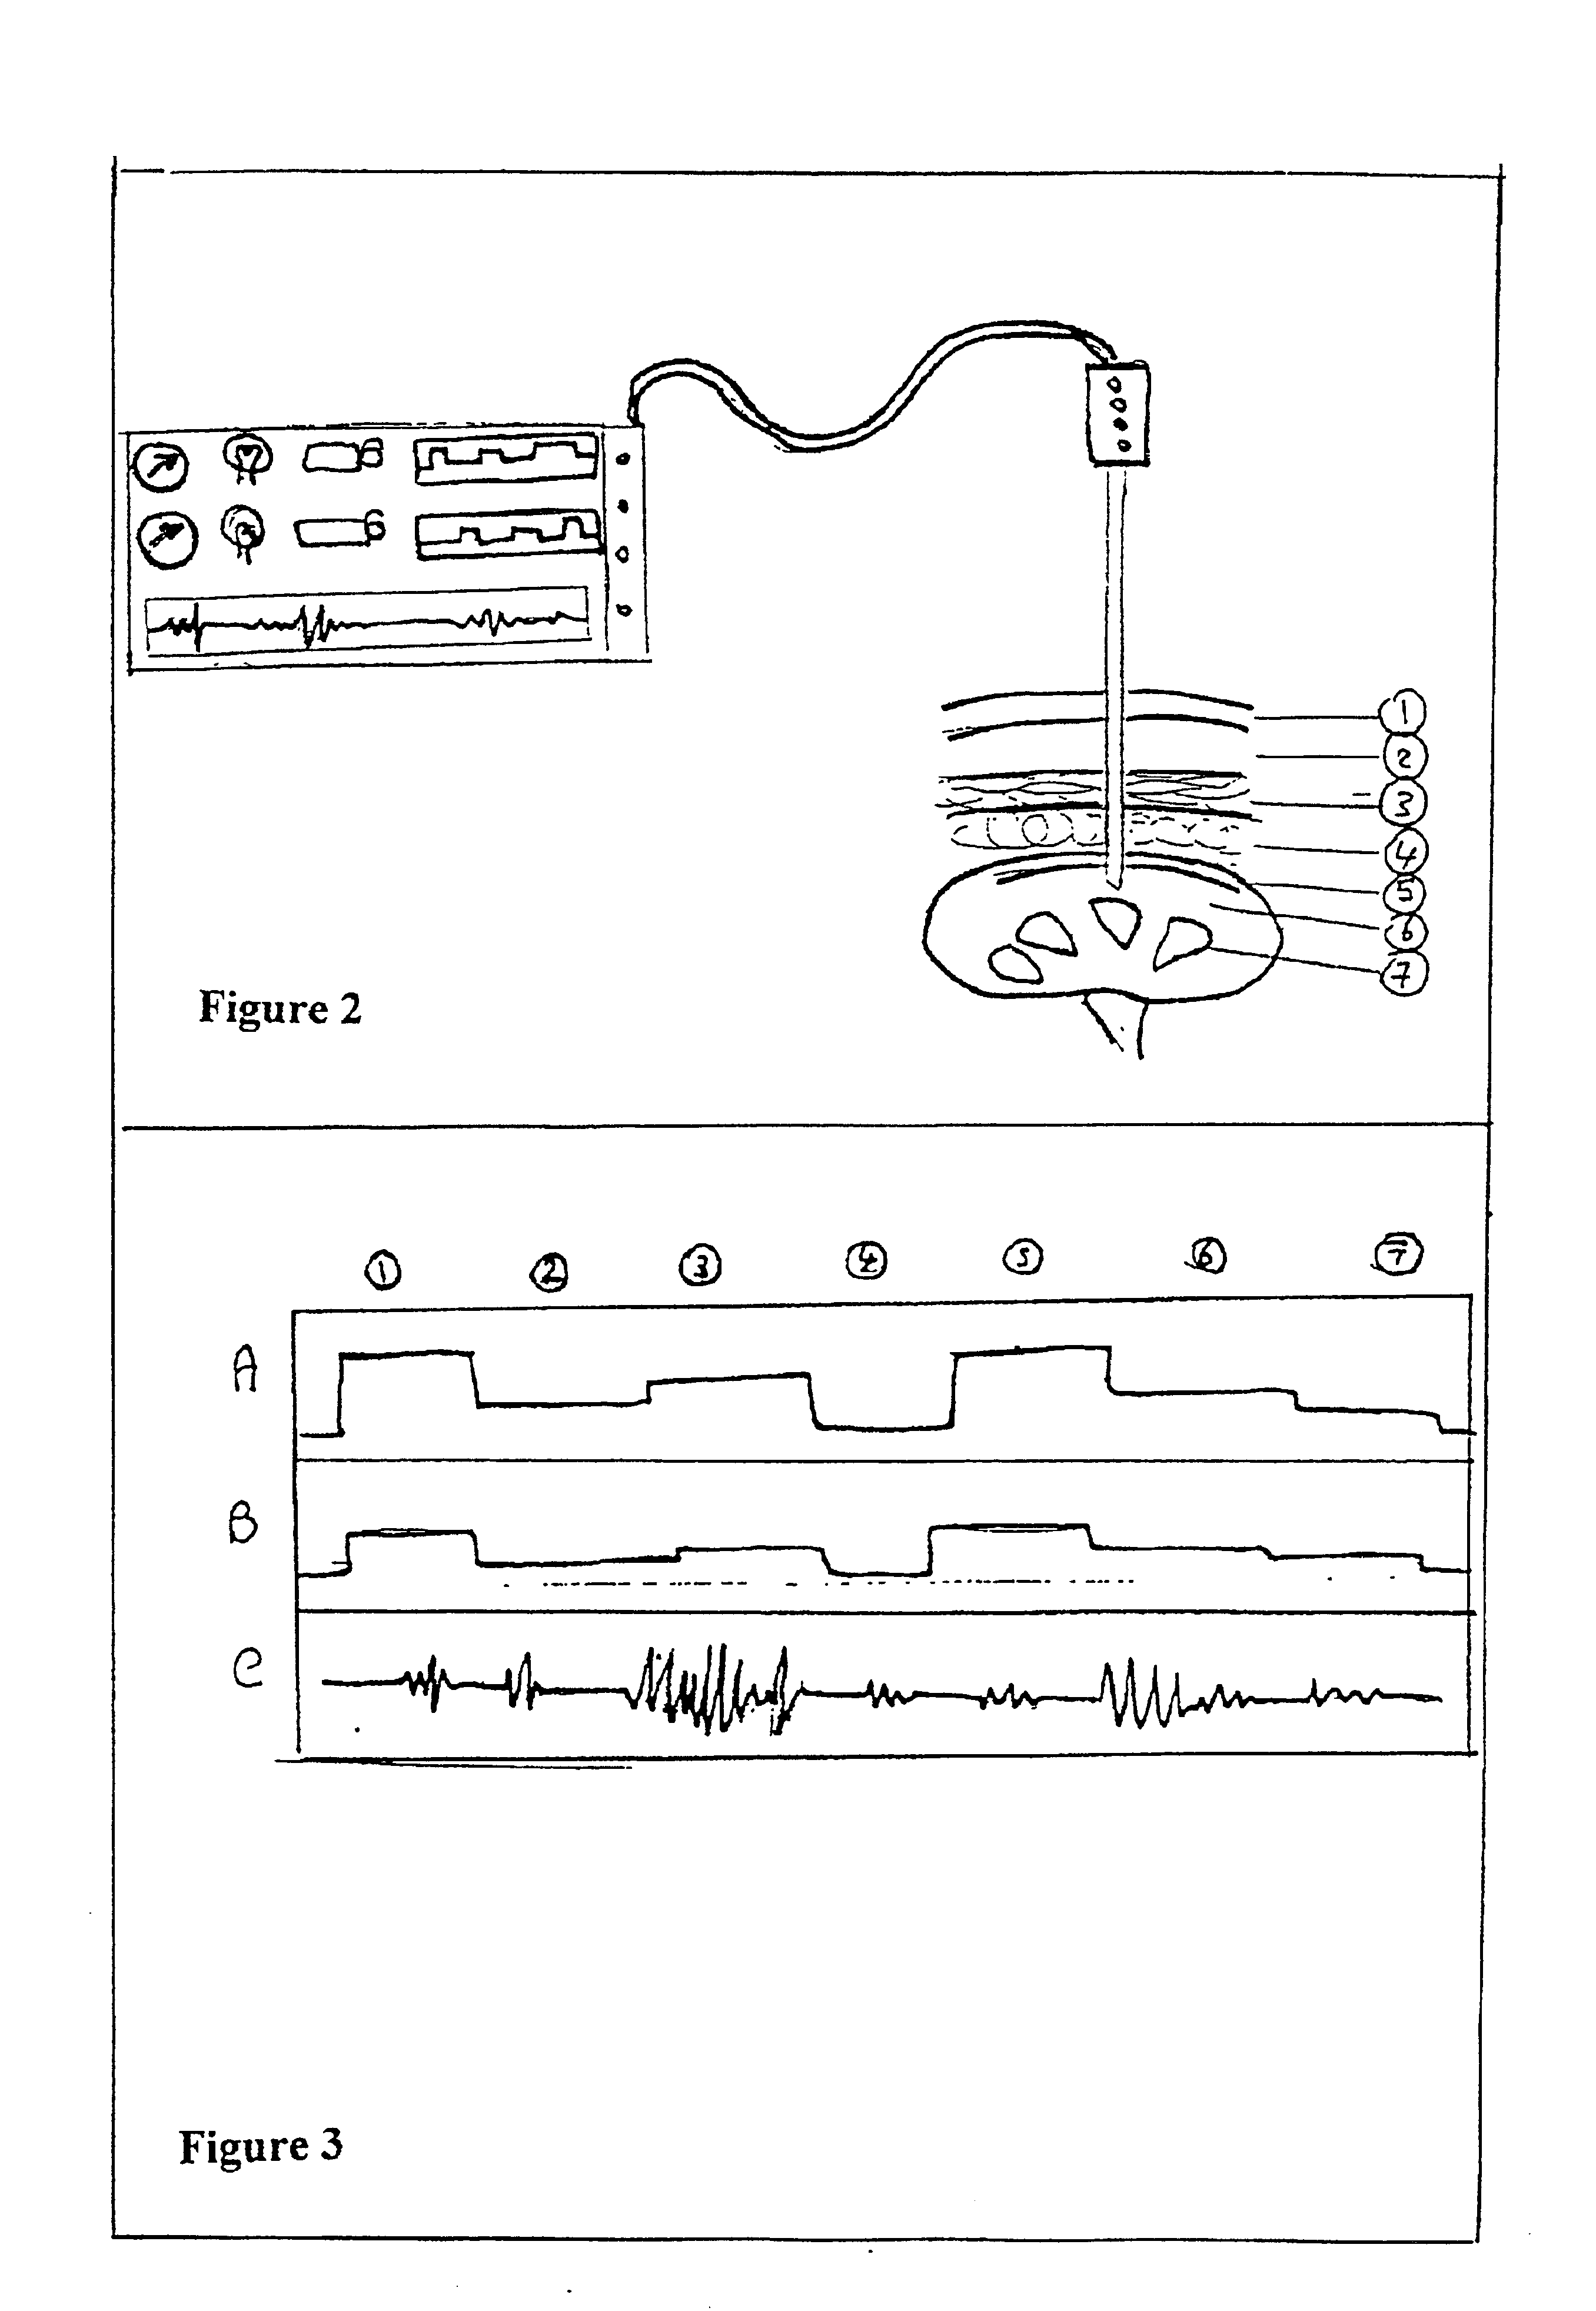 Detector of living tissue strength and electrical resistance and activity